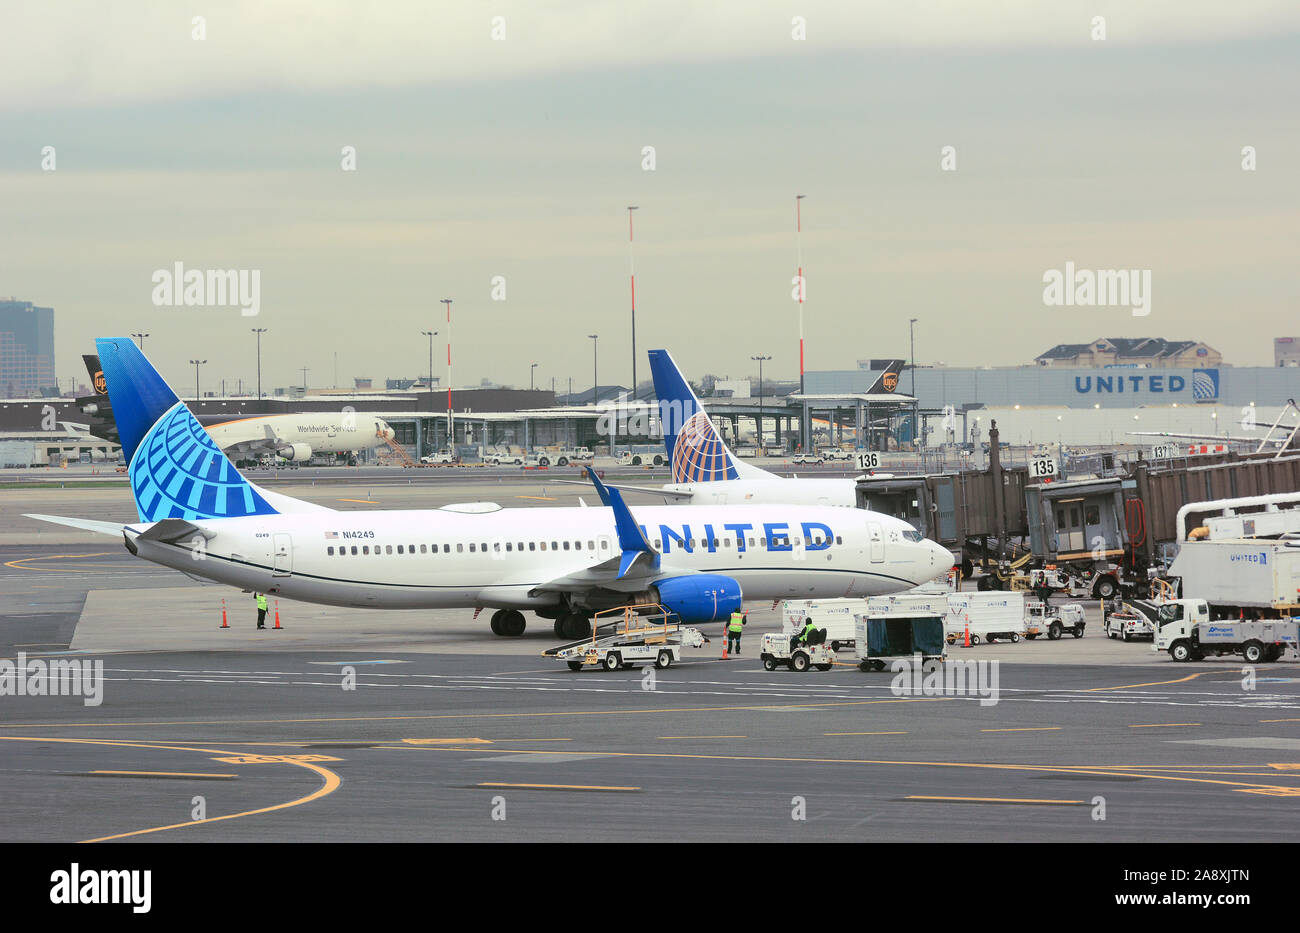 NEWARK, NEW JERSEY - 05 NOV 2019: United Airlines 737 airplane on the tarmac approaching its gate at Newark Liberty International Airport (EWR). Stock Photo